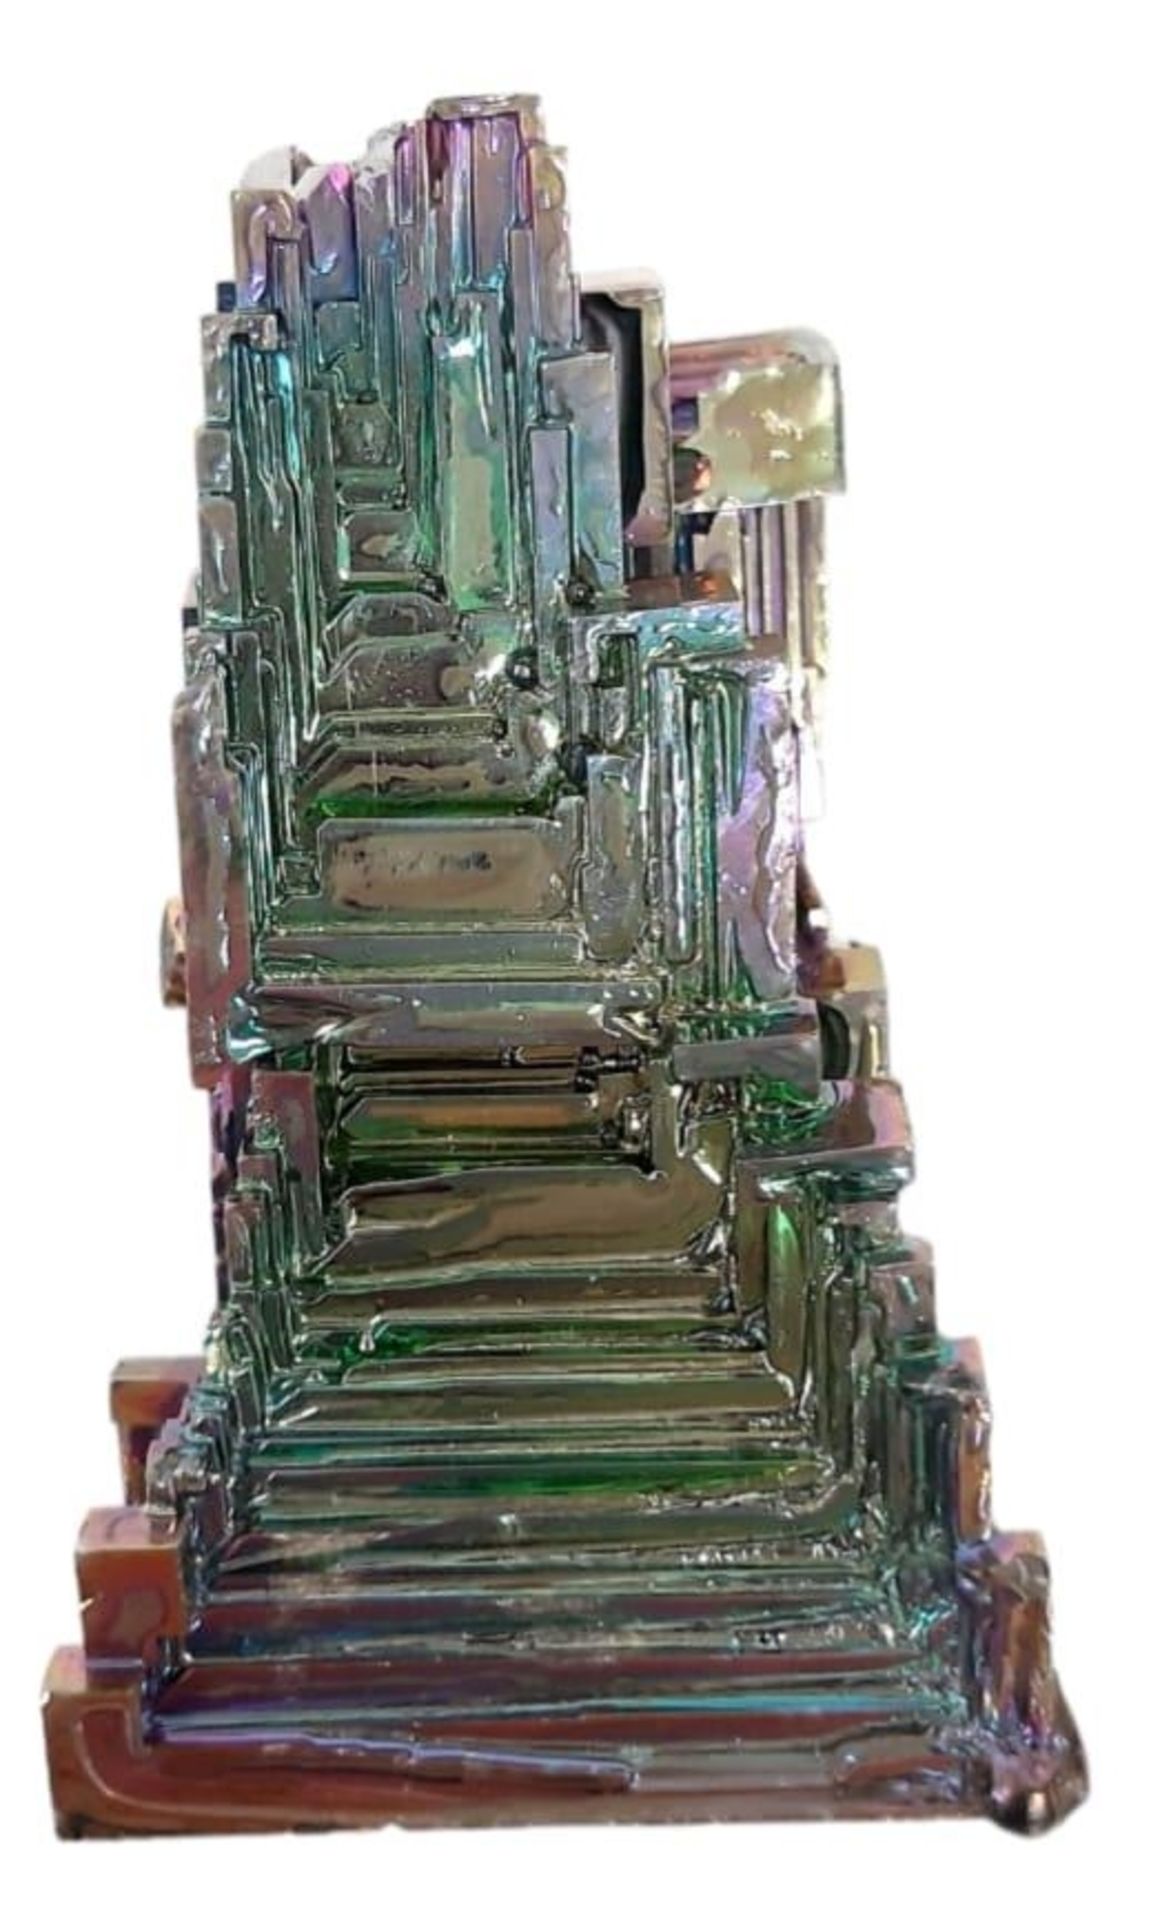 A mesmerising, large, BISMUTH compound crystal, dimensions: 52 x 30 x 30 mm, weight: 82 g. In a